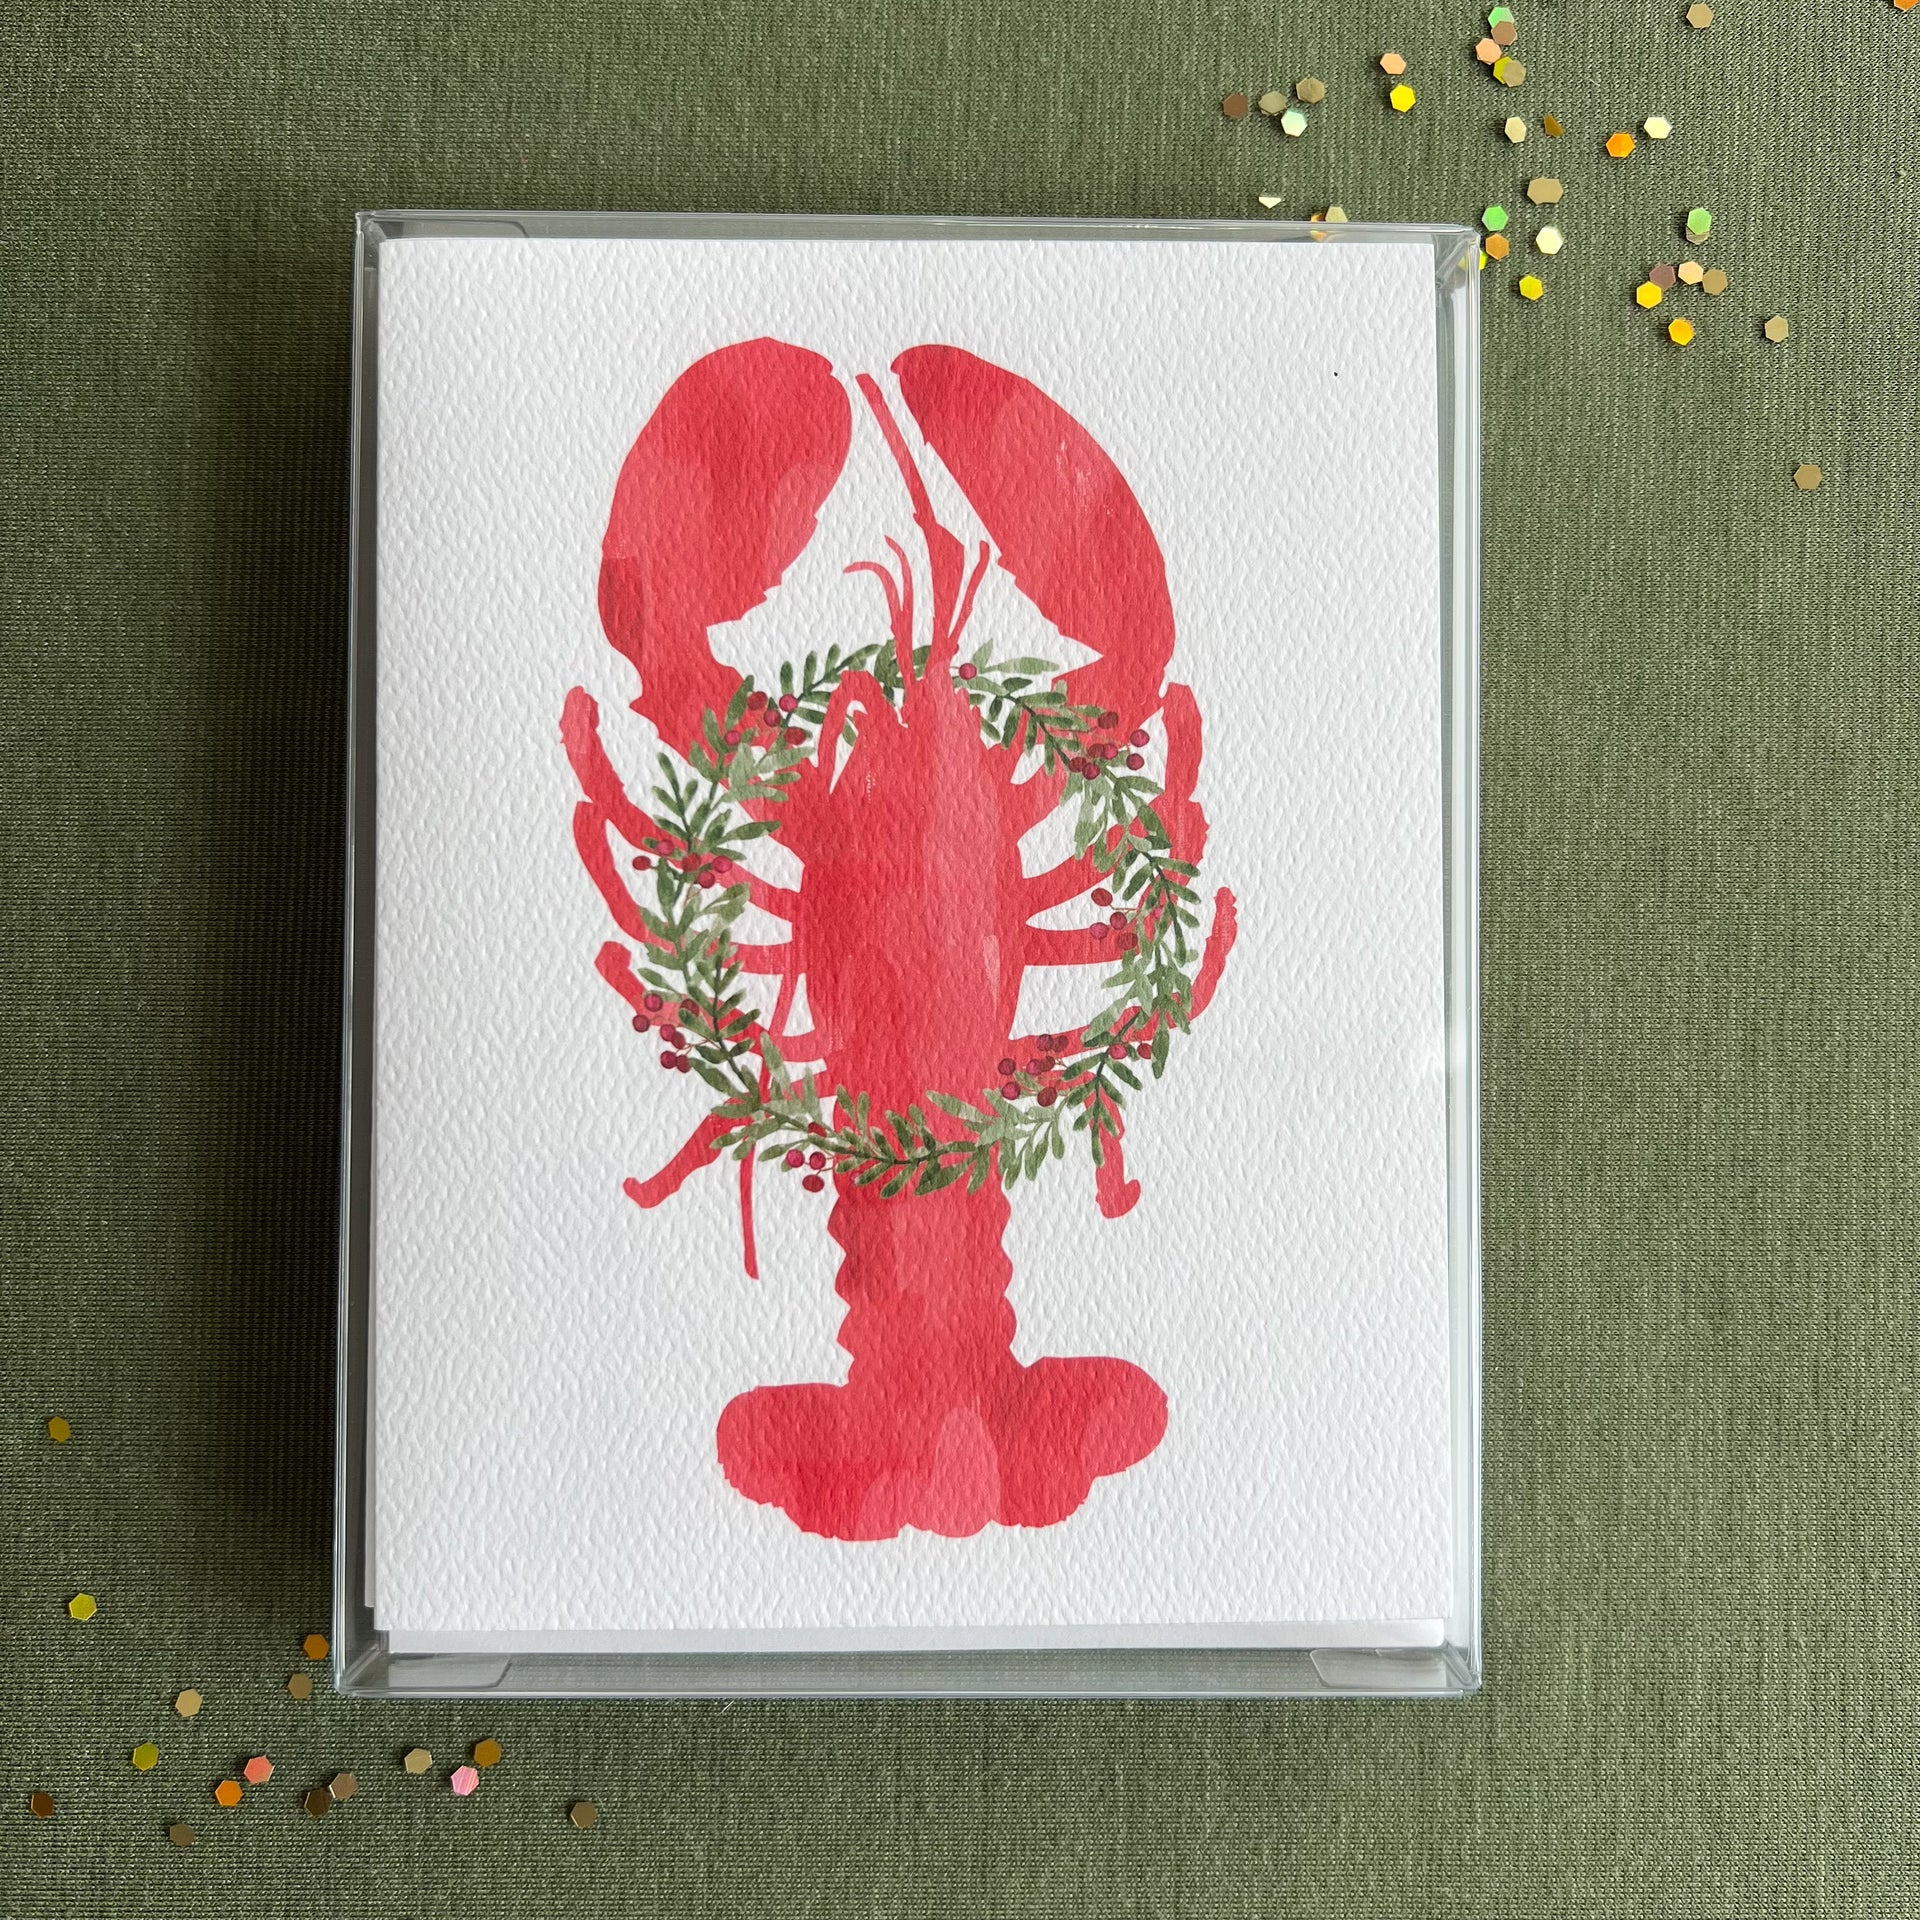 Maine Lobster Holiday Card, Set of 6